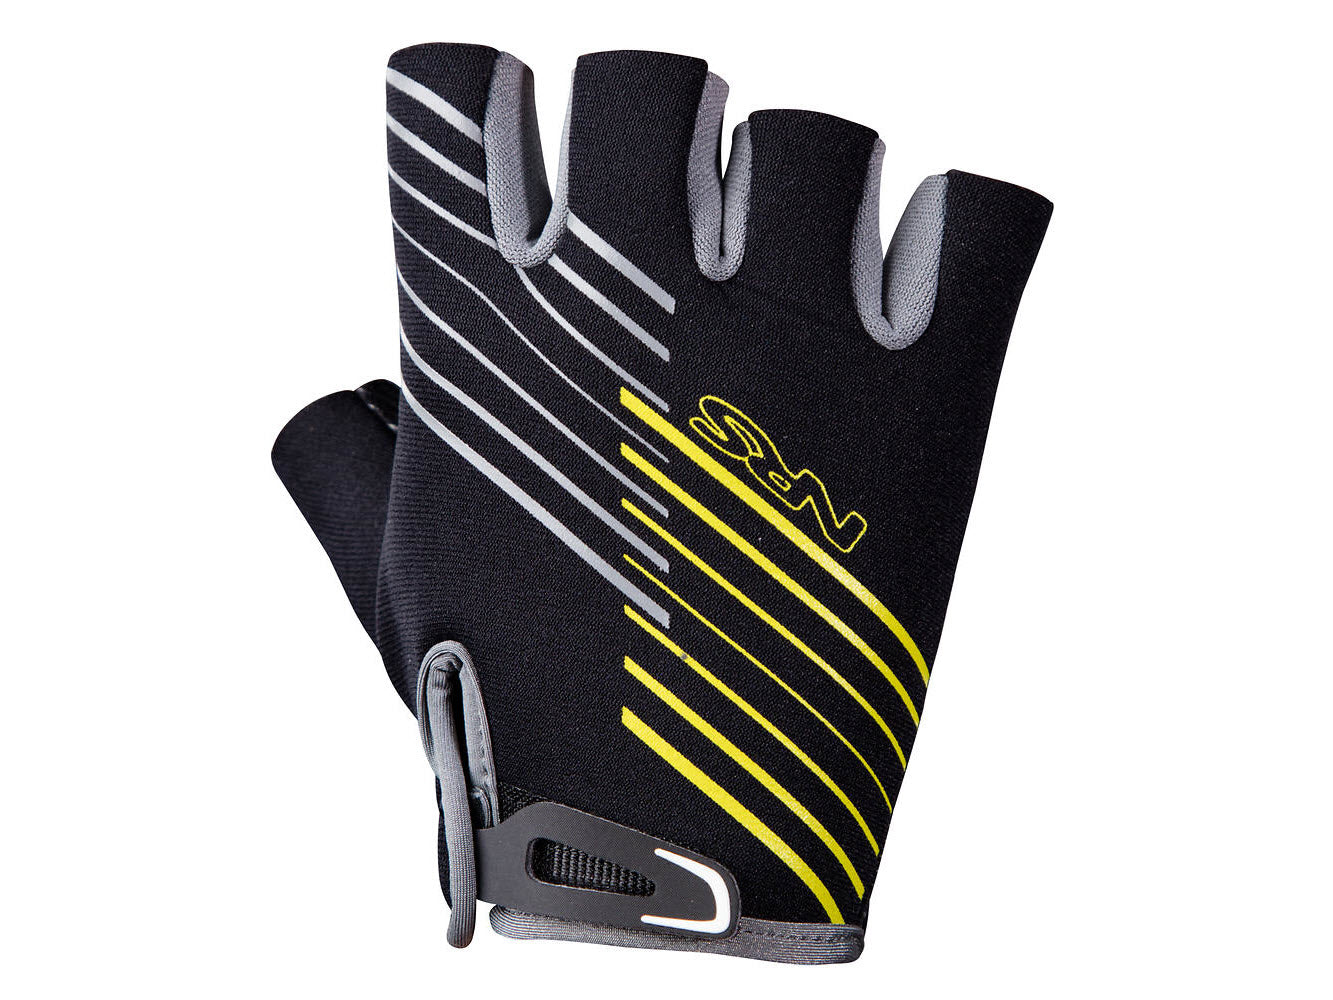 Paddling Handwear - Kayak Gloves and Pogies - Olympic Outdoor Center